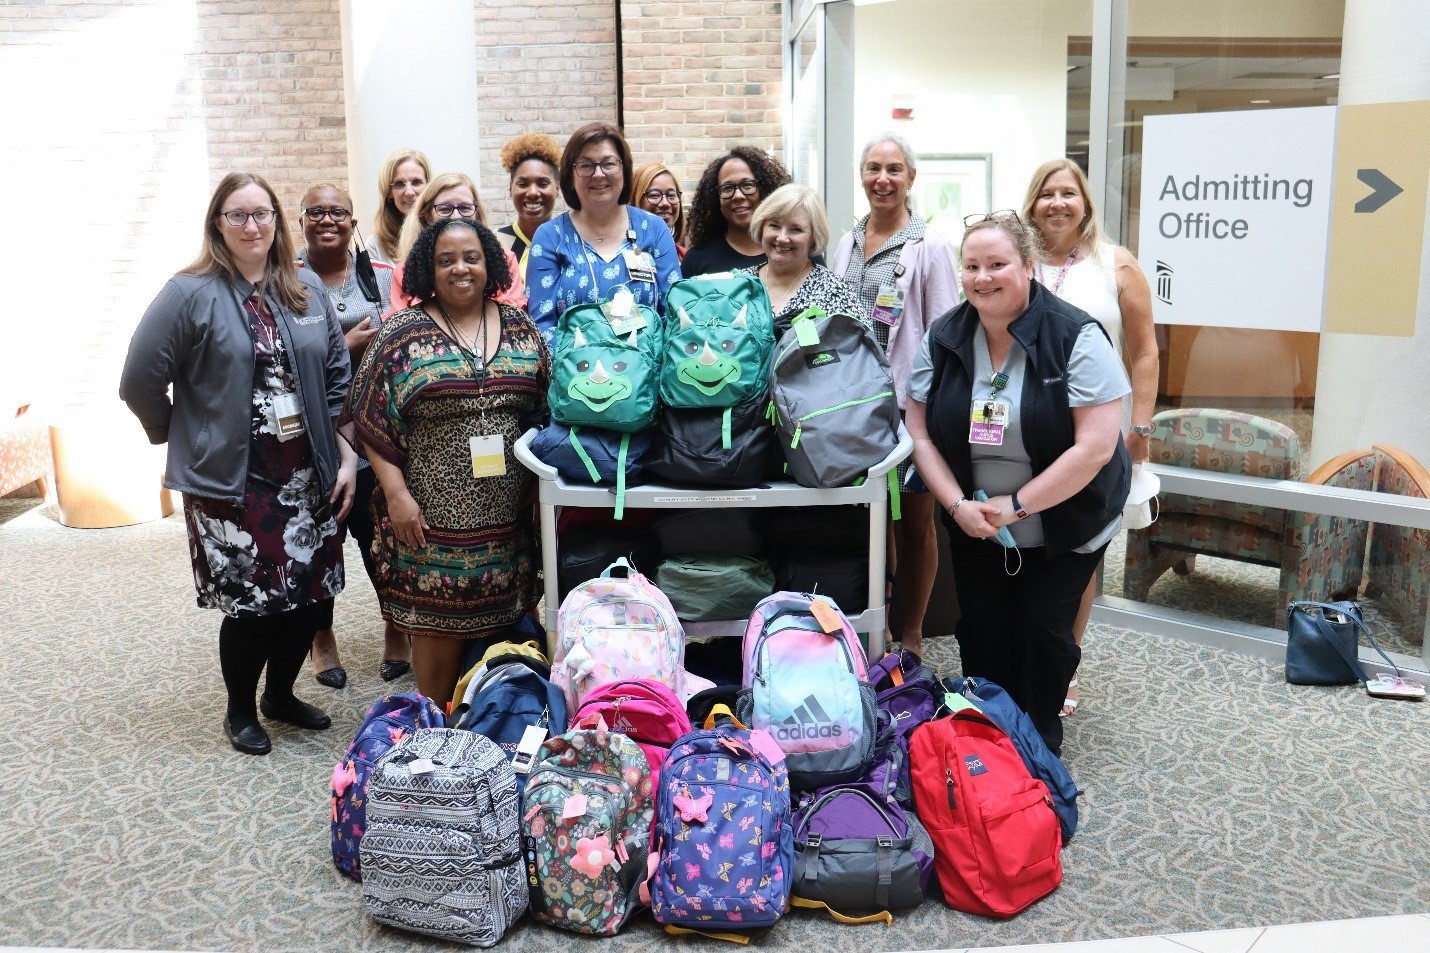 UM BWMC Care Management team members donated 48 backpacks to the Department of Social Services' annual backpack program.
UM BWMC team members donated over 1,100 school supplies to the Anne Arundel County Police Department's Stuff A Cruiser event for students at Anne Arundel County Public Schools.